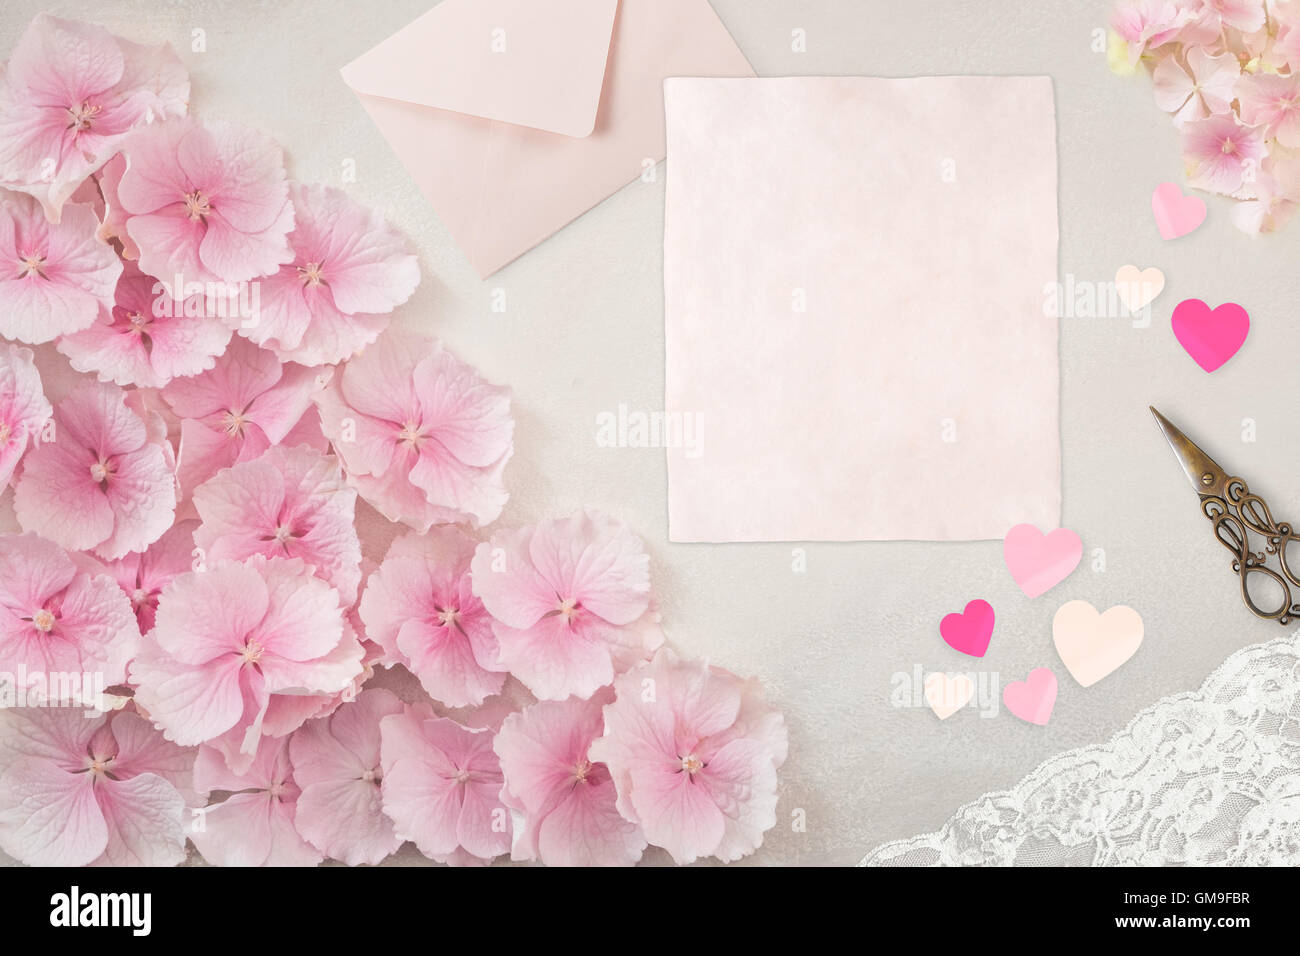 Pretty Styled Desktop, Stationery Flatlay Mockup photograph, with pale pink notepaper and envelope Stock Photo